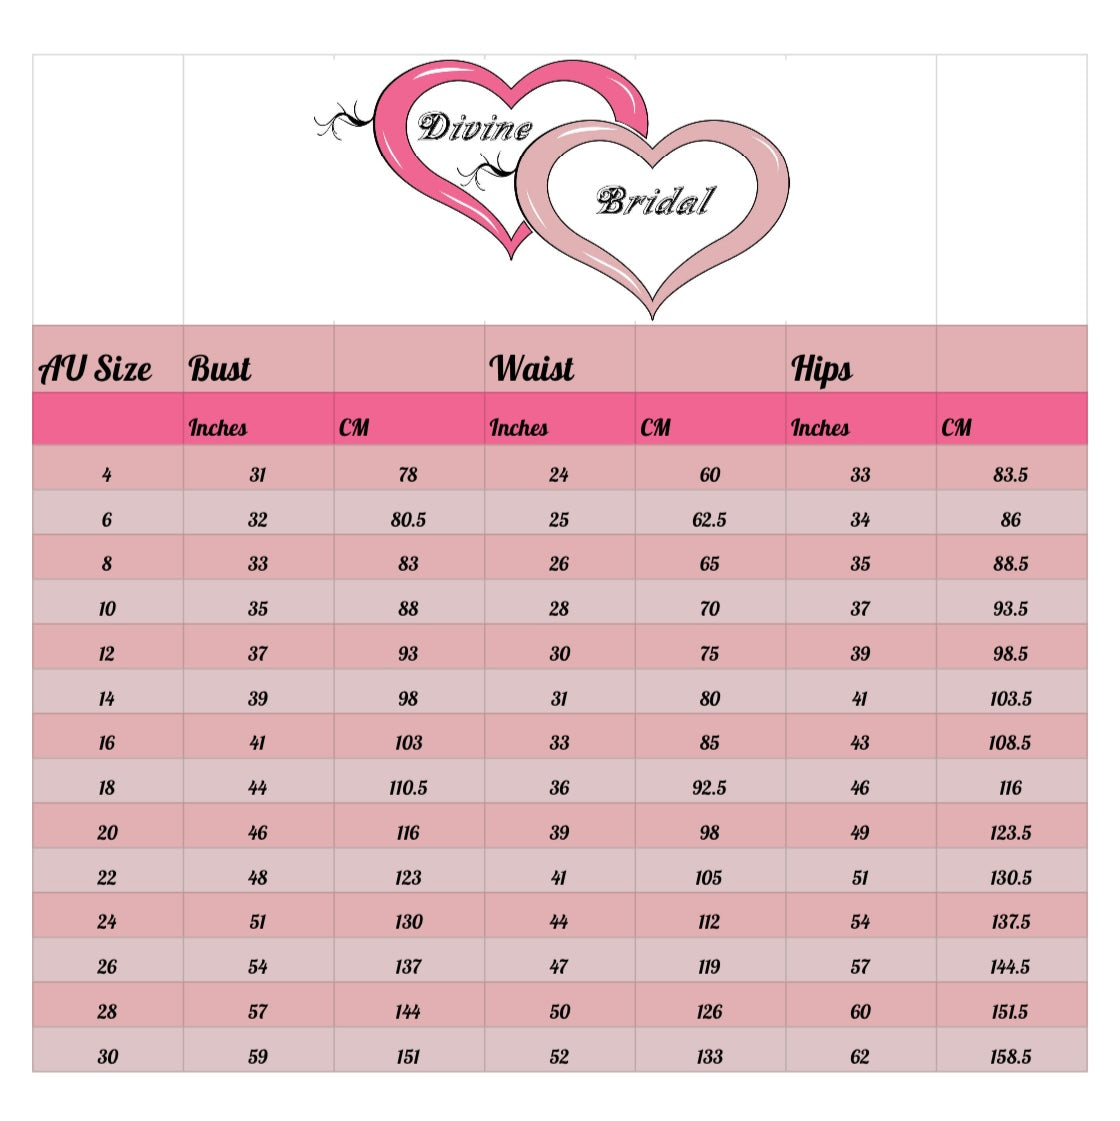 AU size chart for women's clothing, showing sizes 4 to 30, with measurements in Inches & centimeters for bust, waist, and hips.